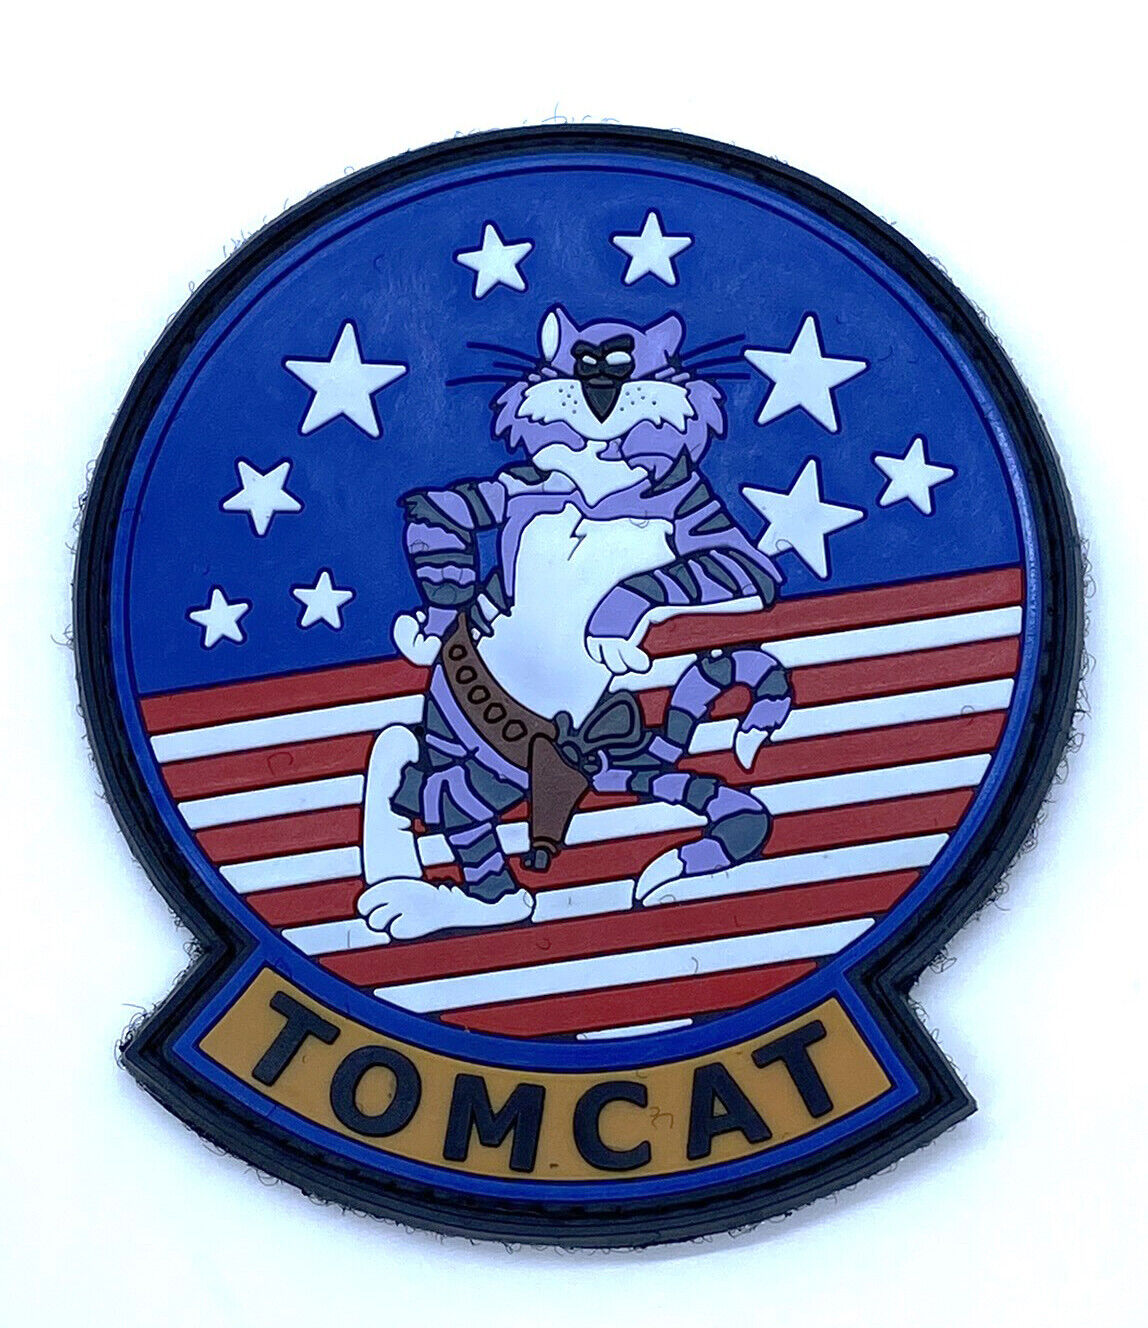 Tomcat 'Anytime Baby' PVC Glow in the Dark Patch, Hook and Loop, 4 in